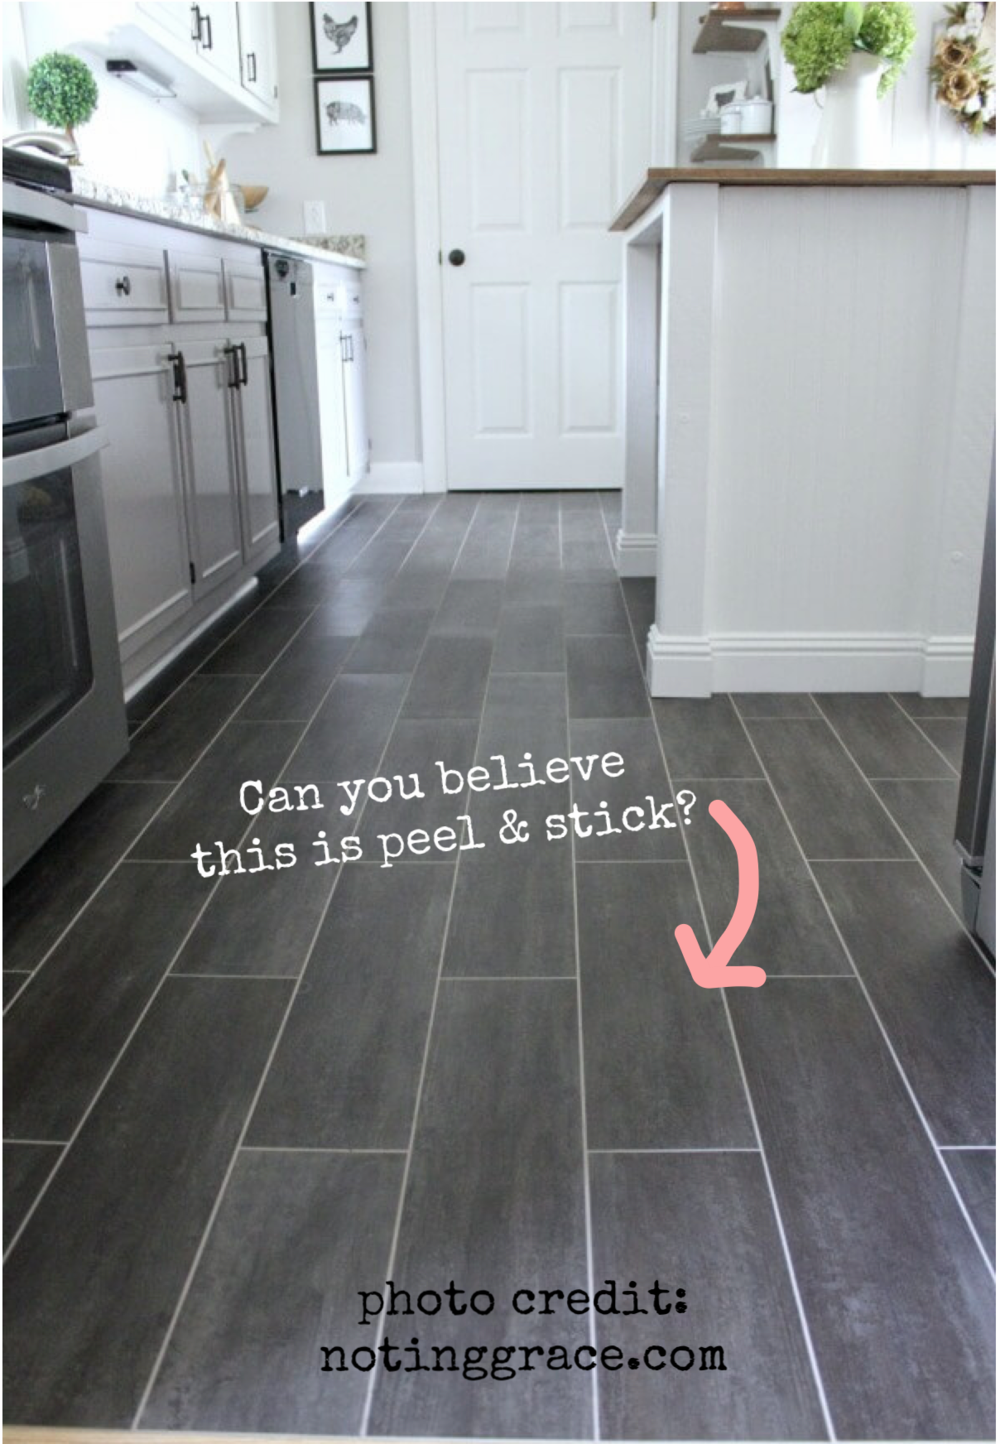 Ideas For Covering Up Tile Floors, What Flooring Can You Lay Over Ceramic Tile